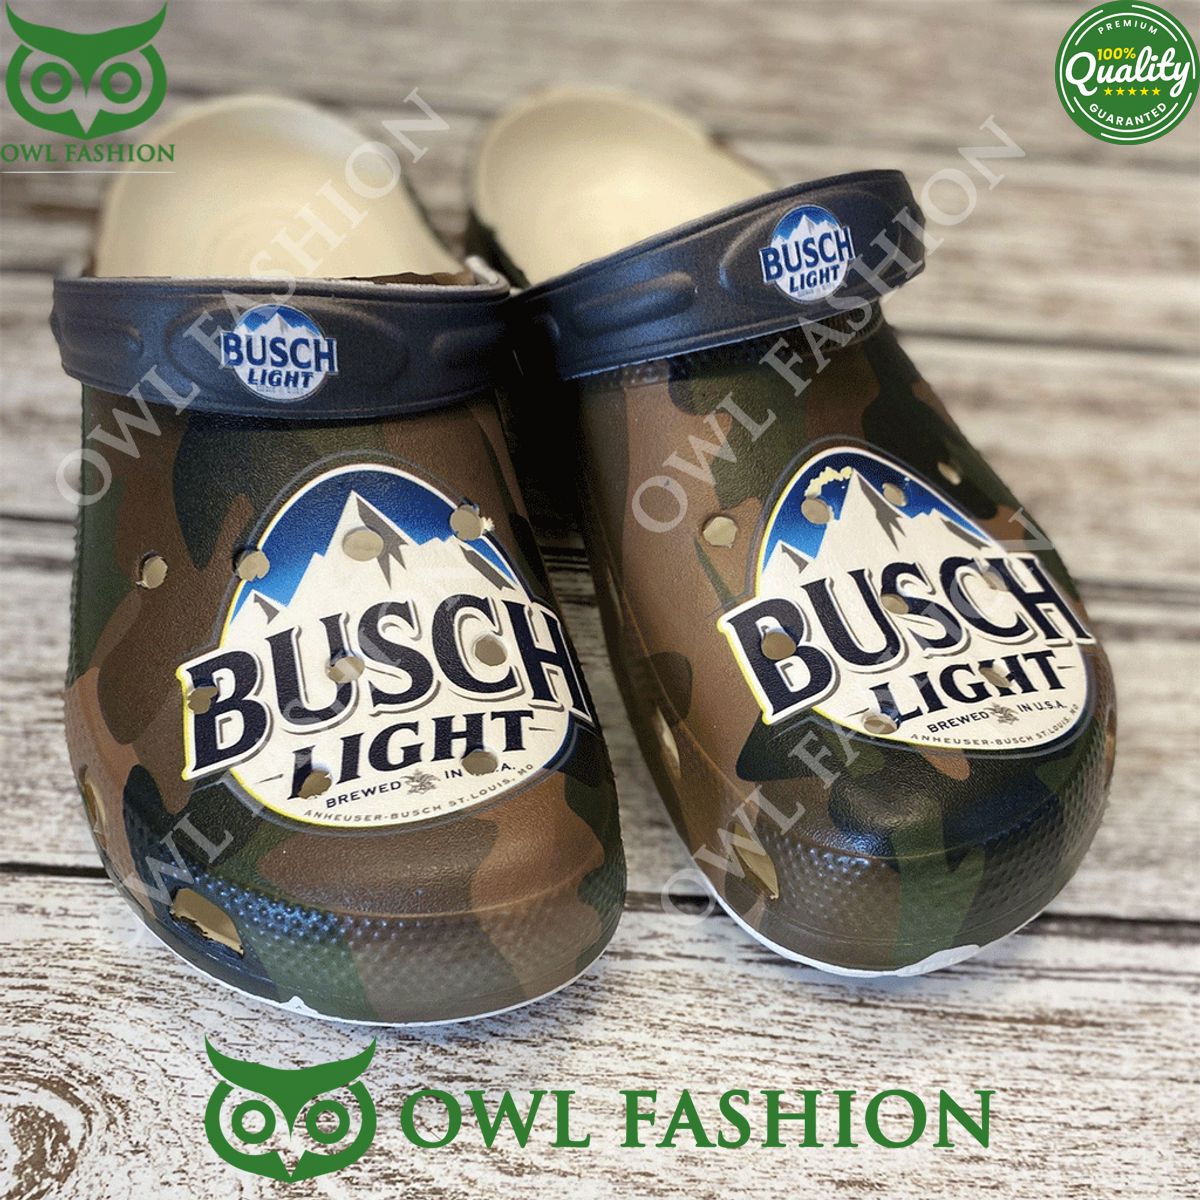 Busch Light Beer Camouflage Printed Croc Shoes Out of the world